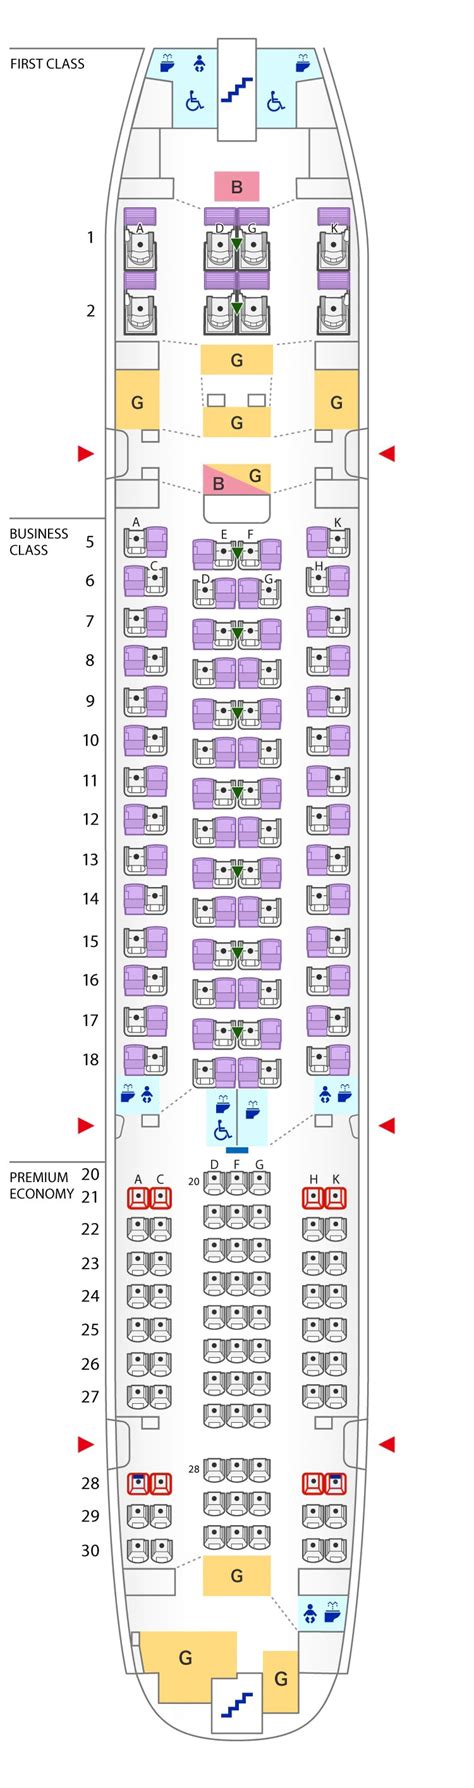 emirates airbus a380 seating chart image to u